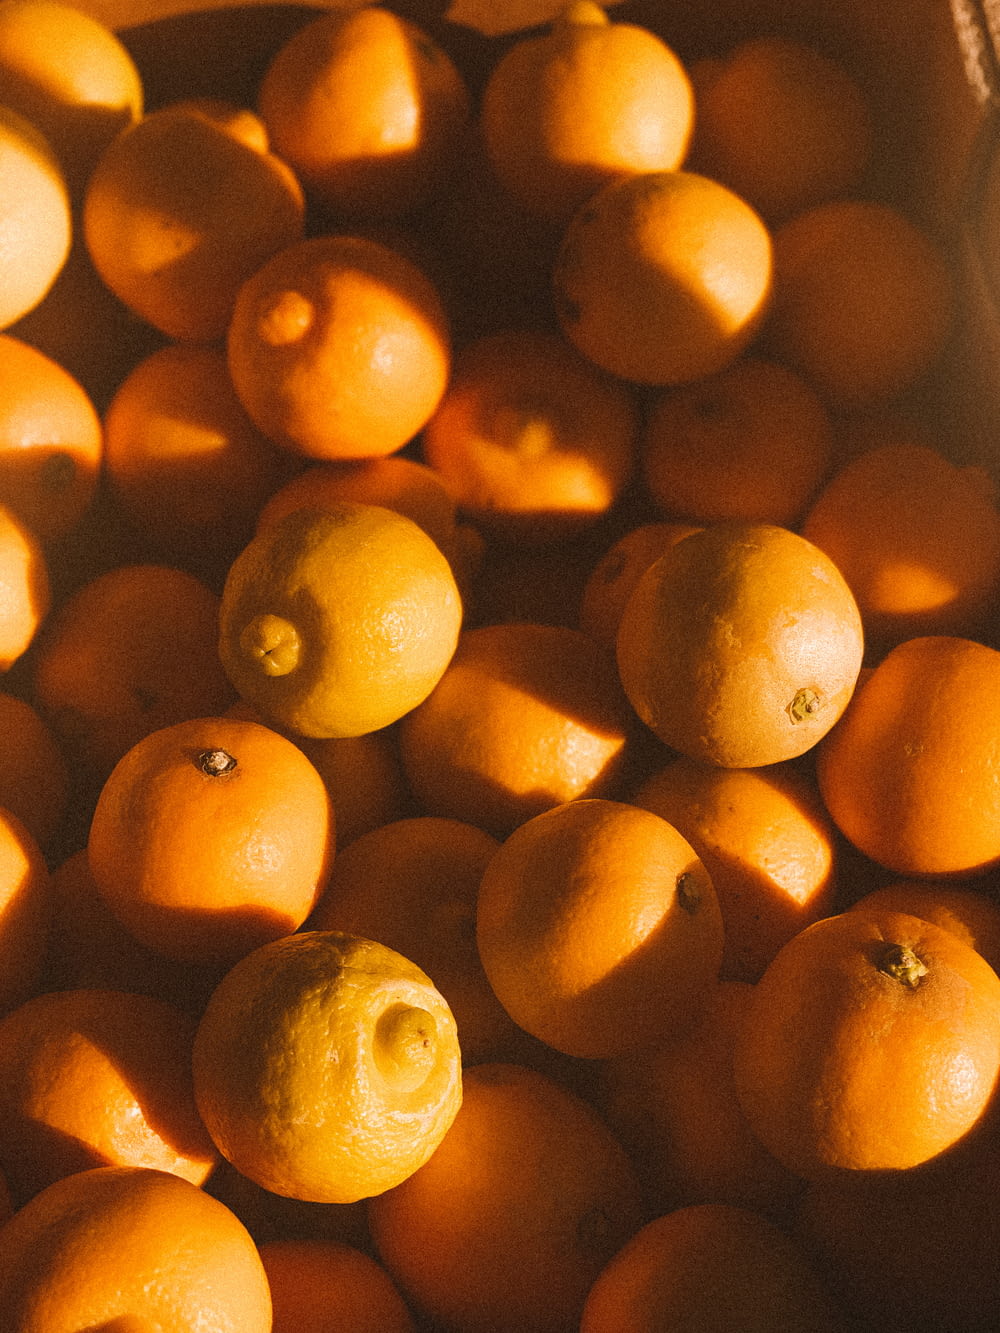 yellow citrus fruits in close up photography